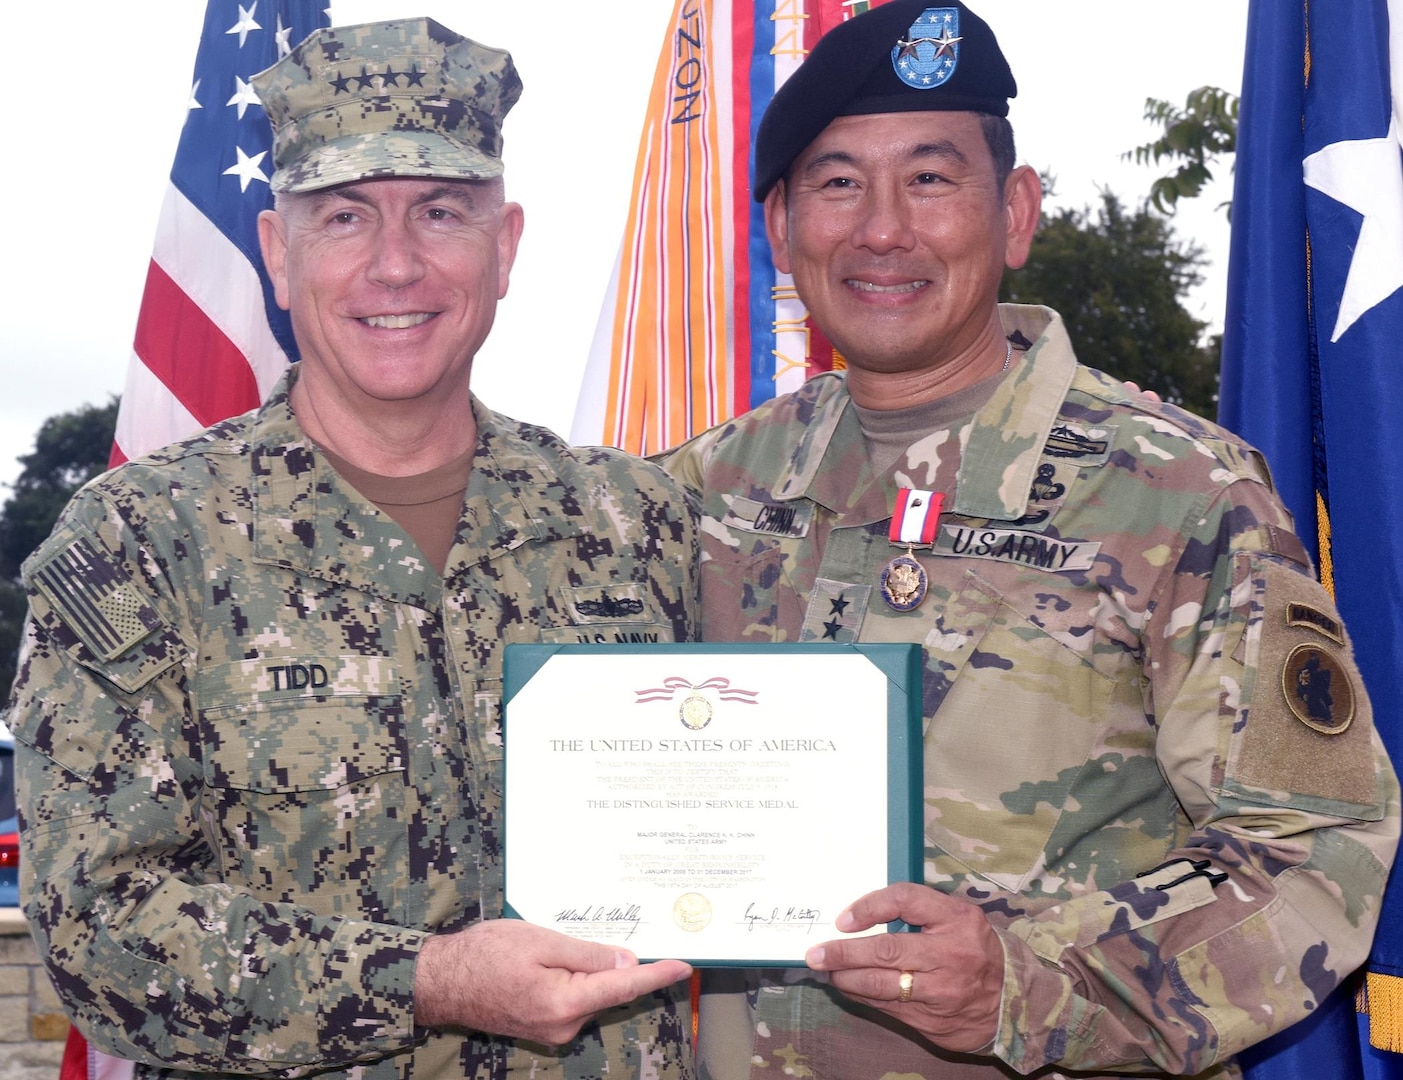 Upon his retirement from the U.S. Army, Maj. Gen. K.K. Chinn is presented the Distinguished Service Medal for exceptionally meritorious service.